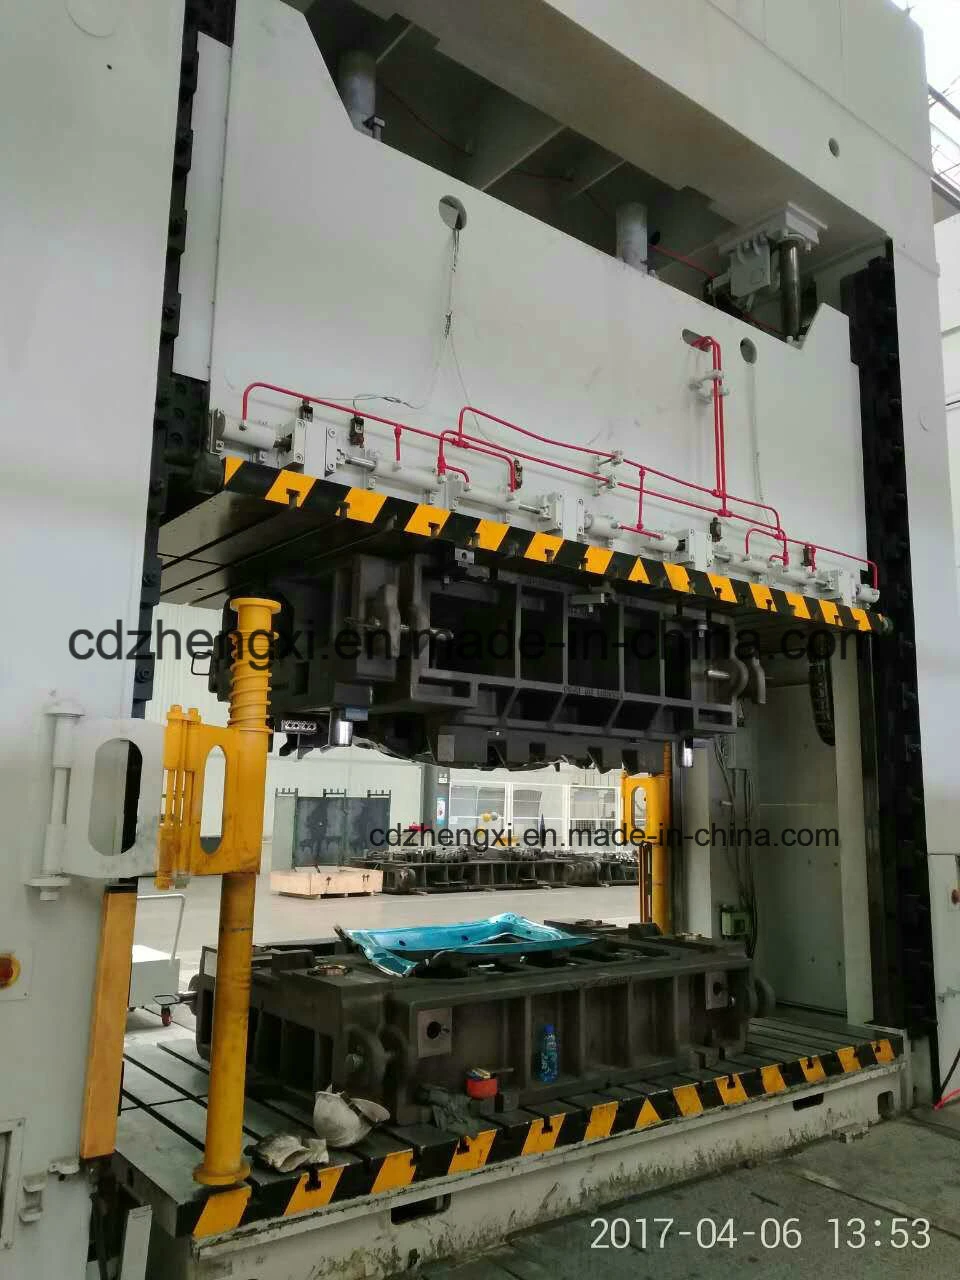 Composite Moulding Press Hydraulic Press Machinery Hydraulic Press Machine Hydraulic Press for Manhole Cover